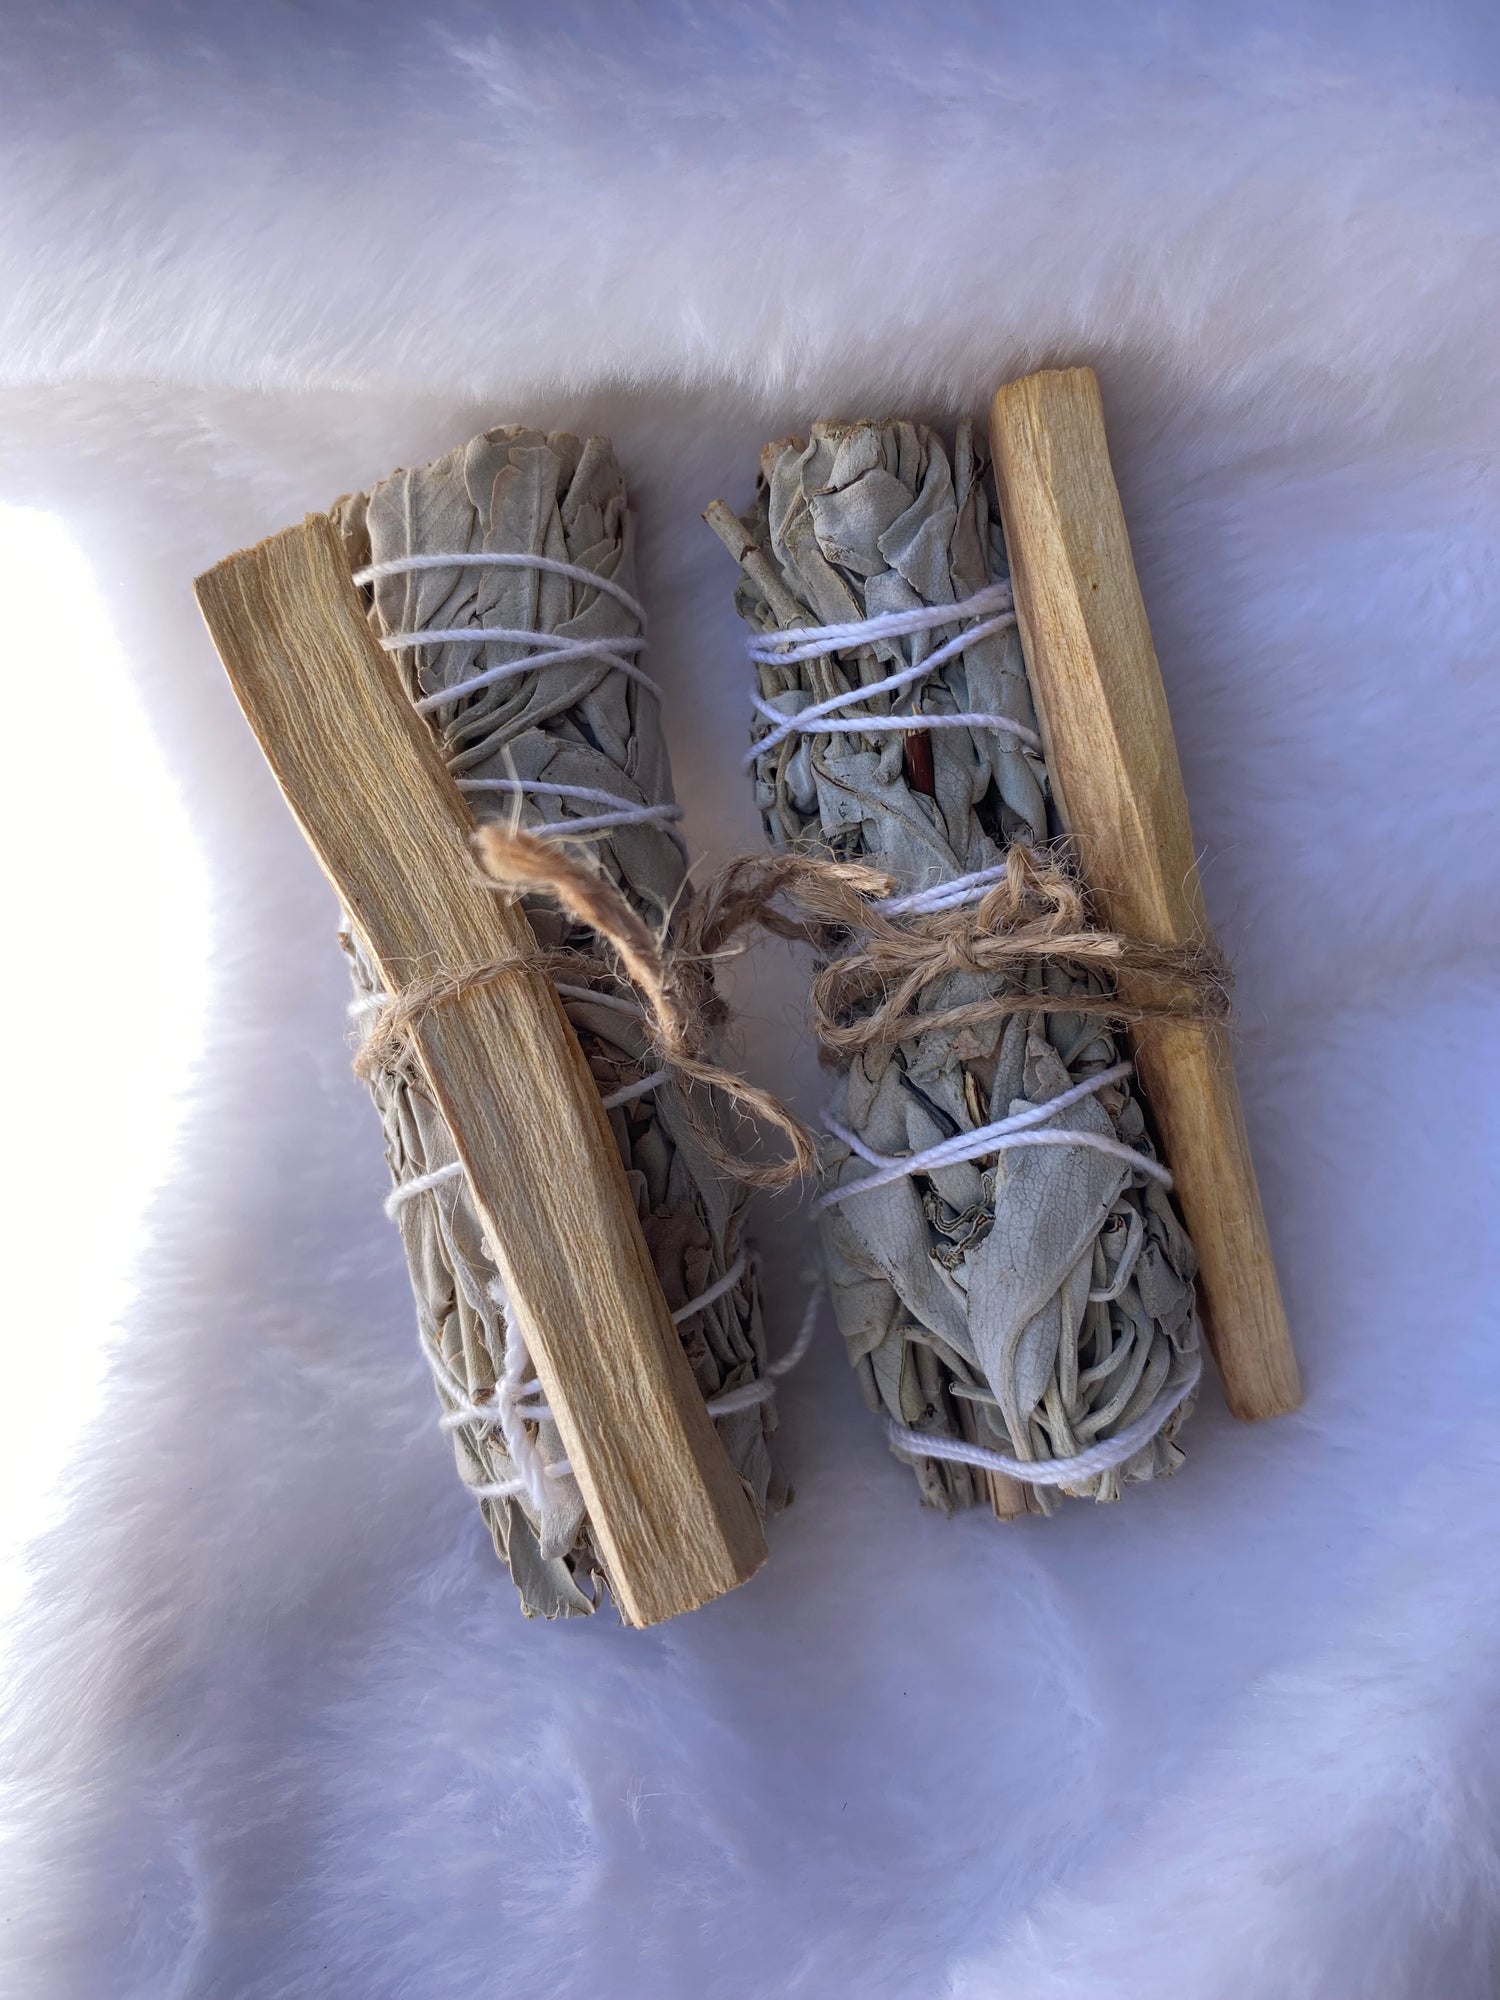 SMUDGING & MORE